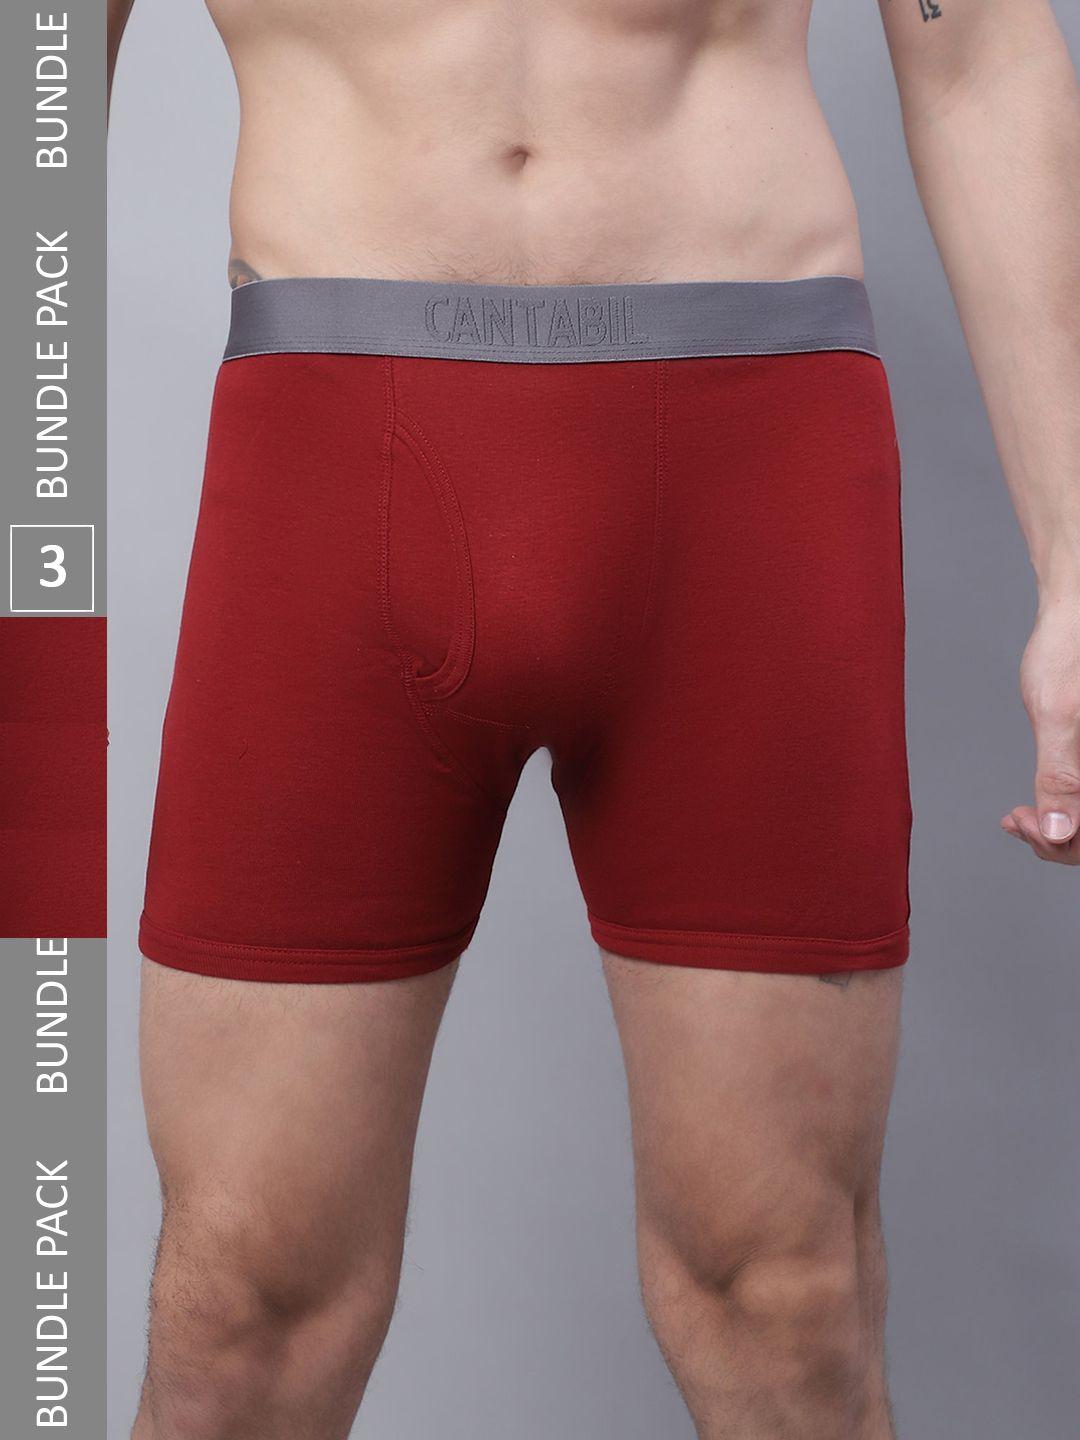 cantabil men pack of 3 cotton basic briefs